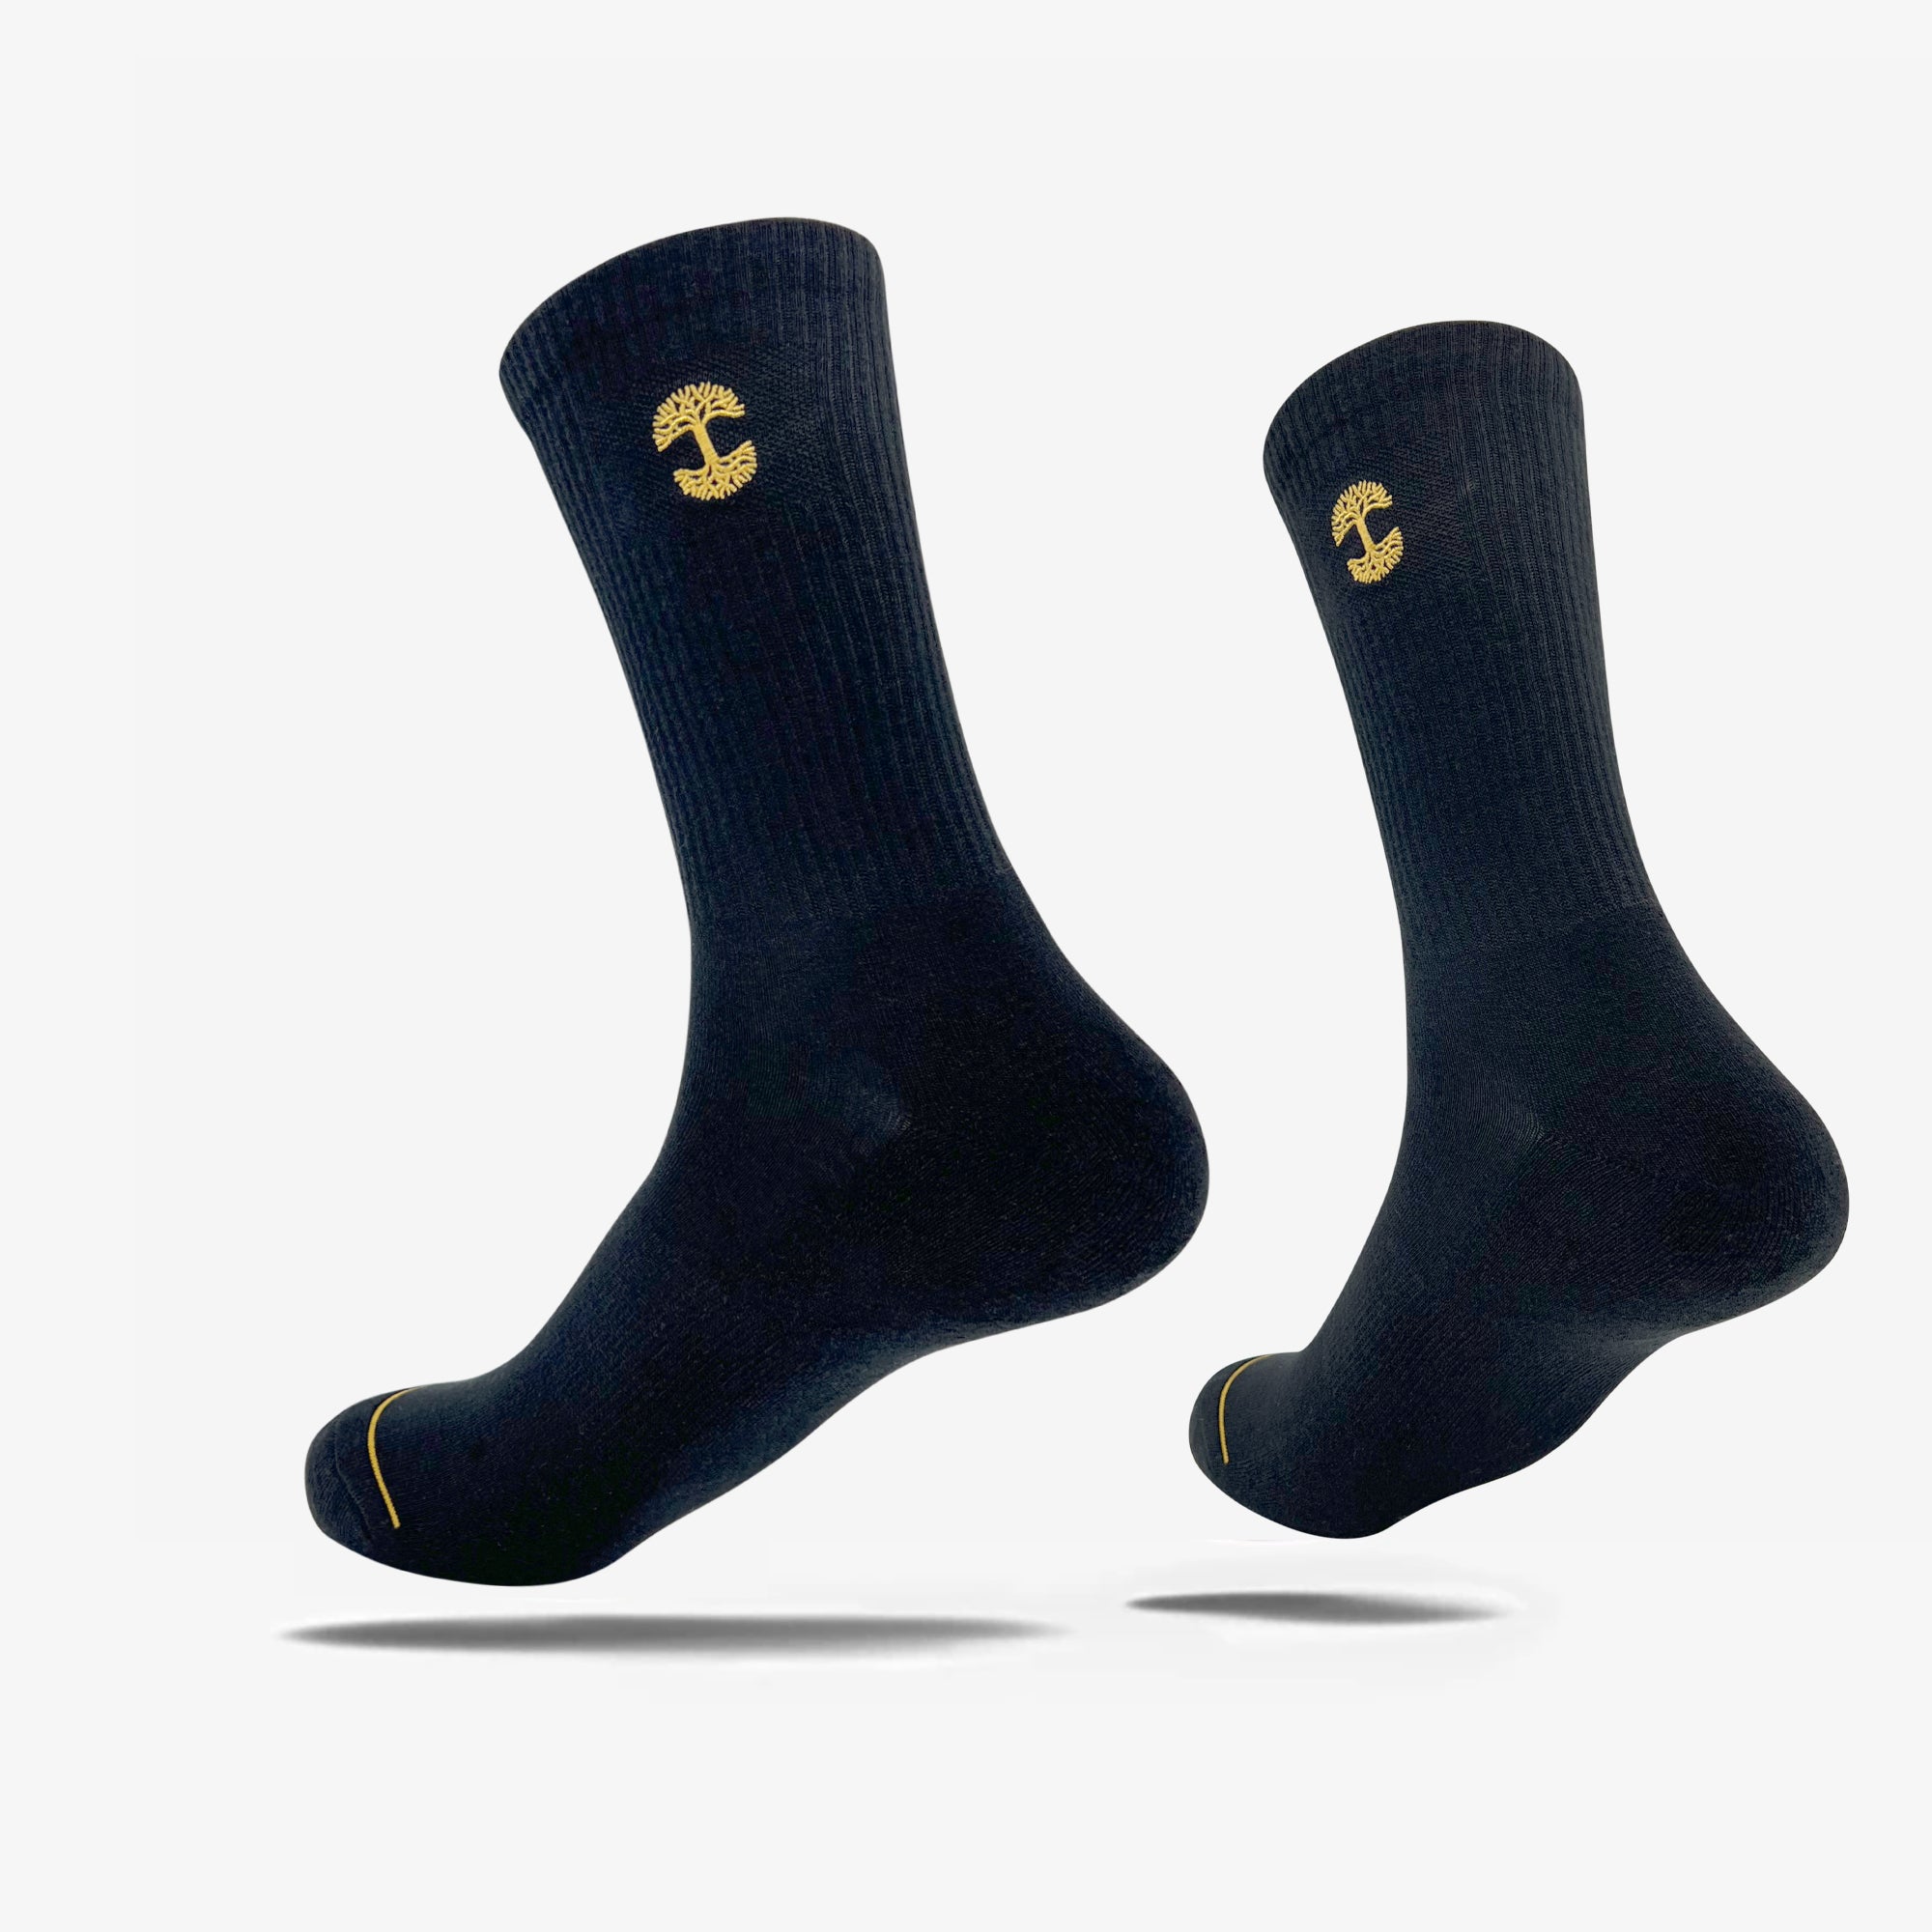 High-cut men's black crew socks with gold embroidered Oaklandish logo at the top.